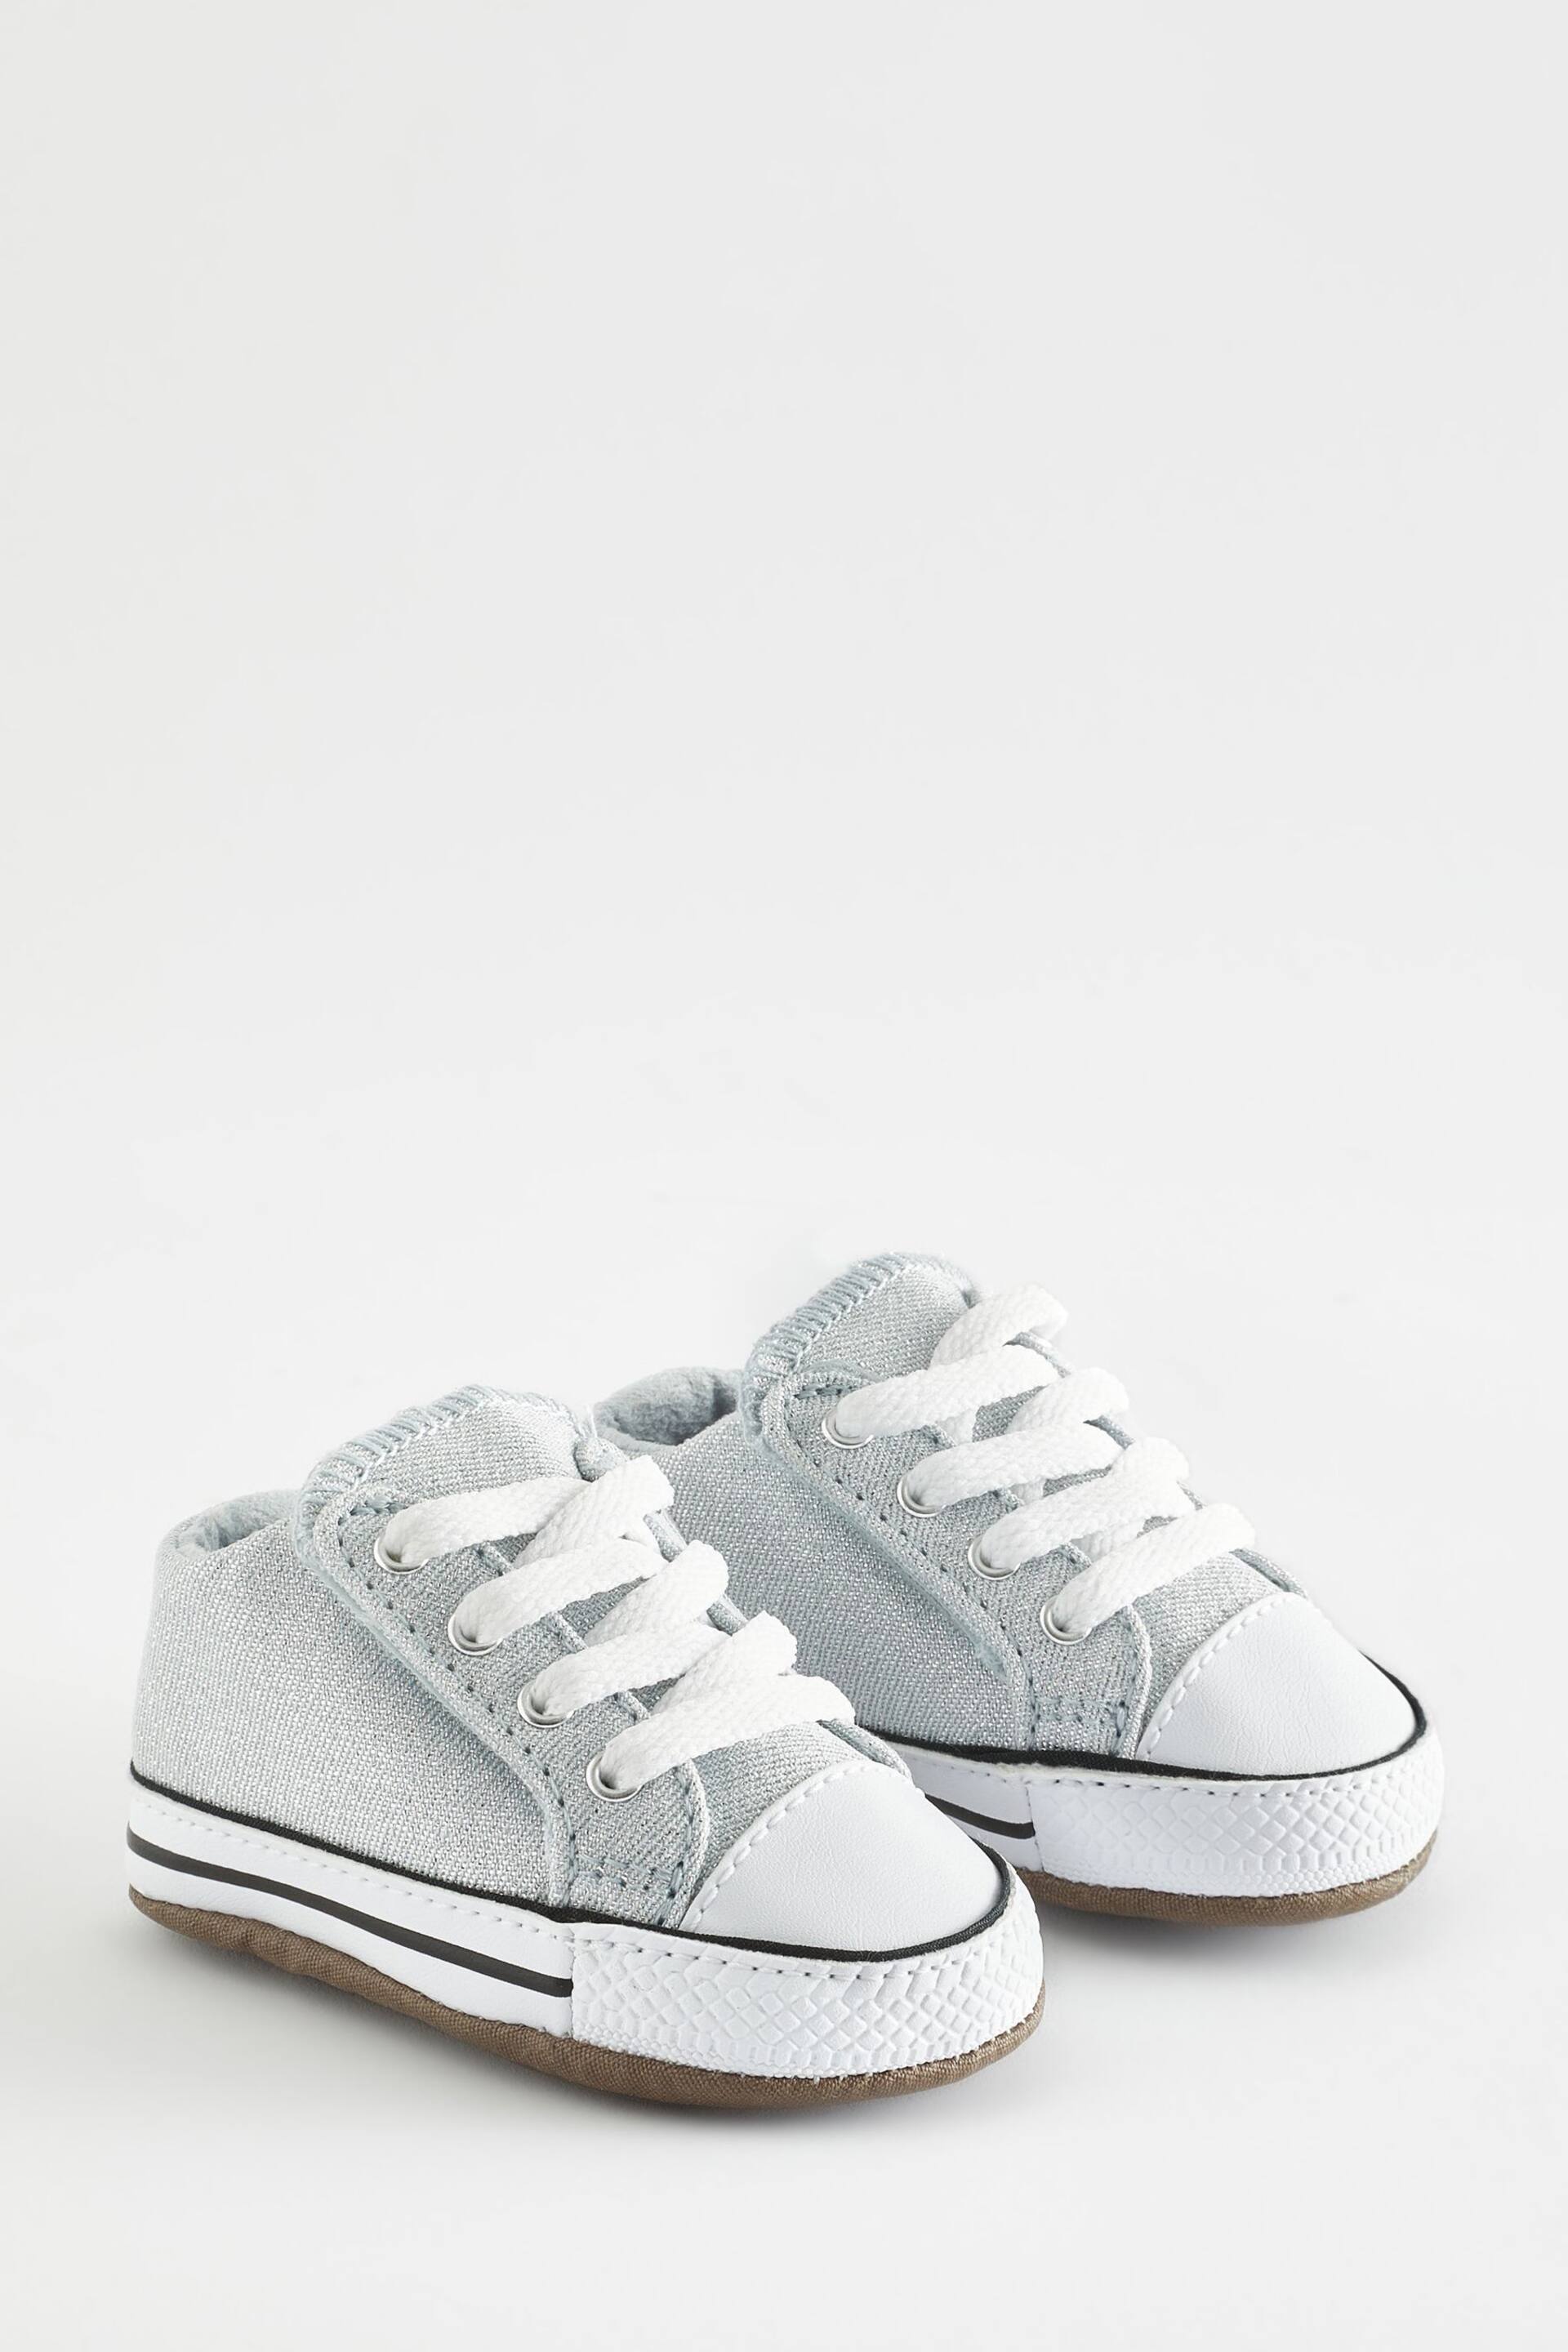 Converse White Chuck Taylor All Star Glitter Pram Shoes - Image 3 of 9